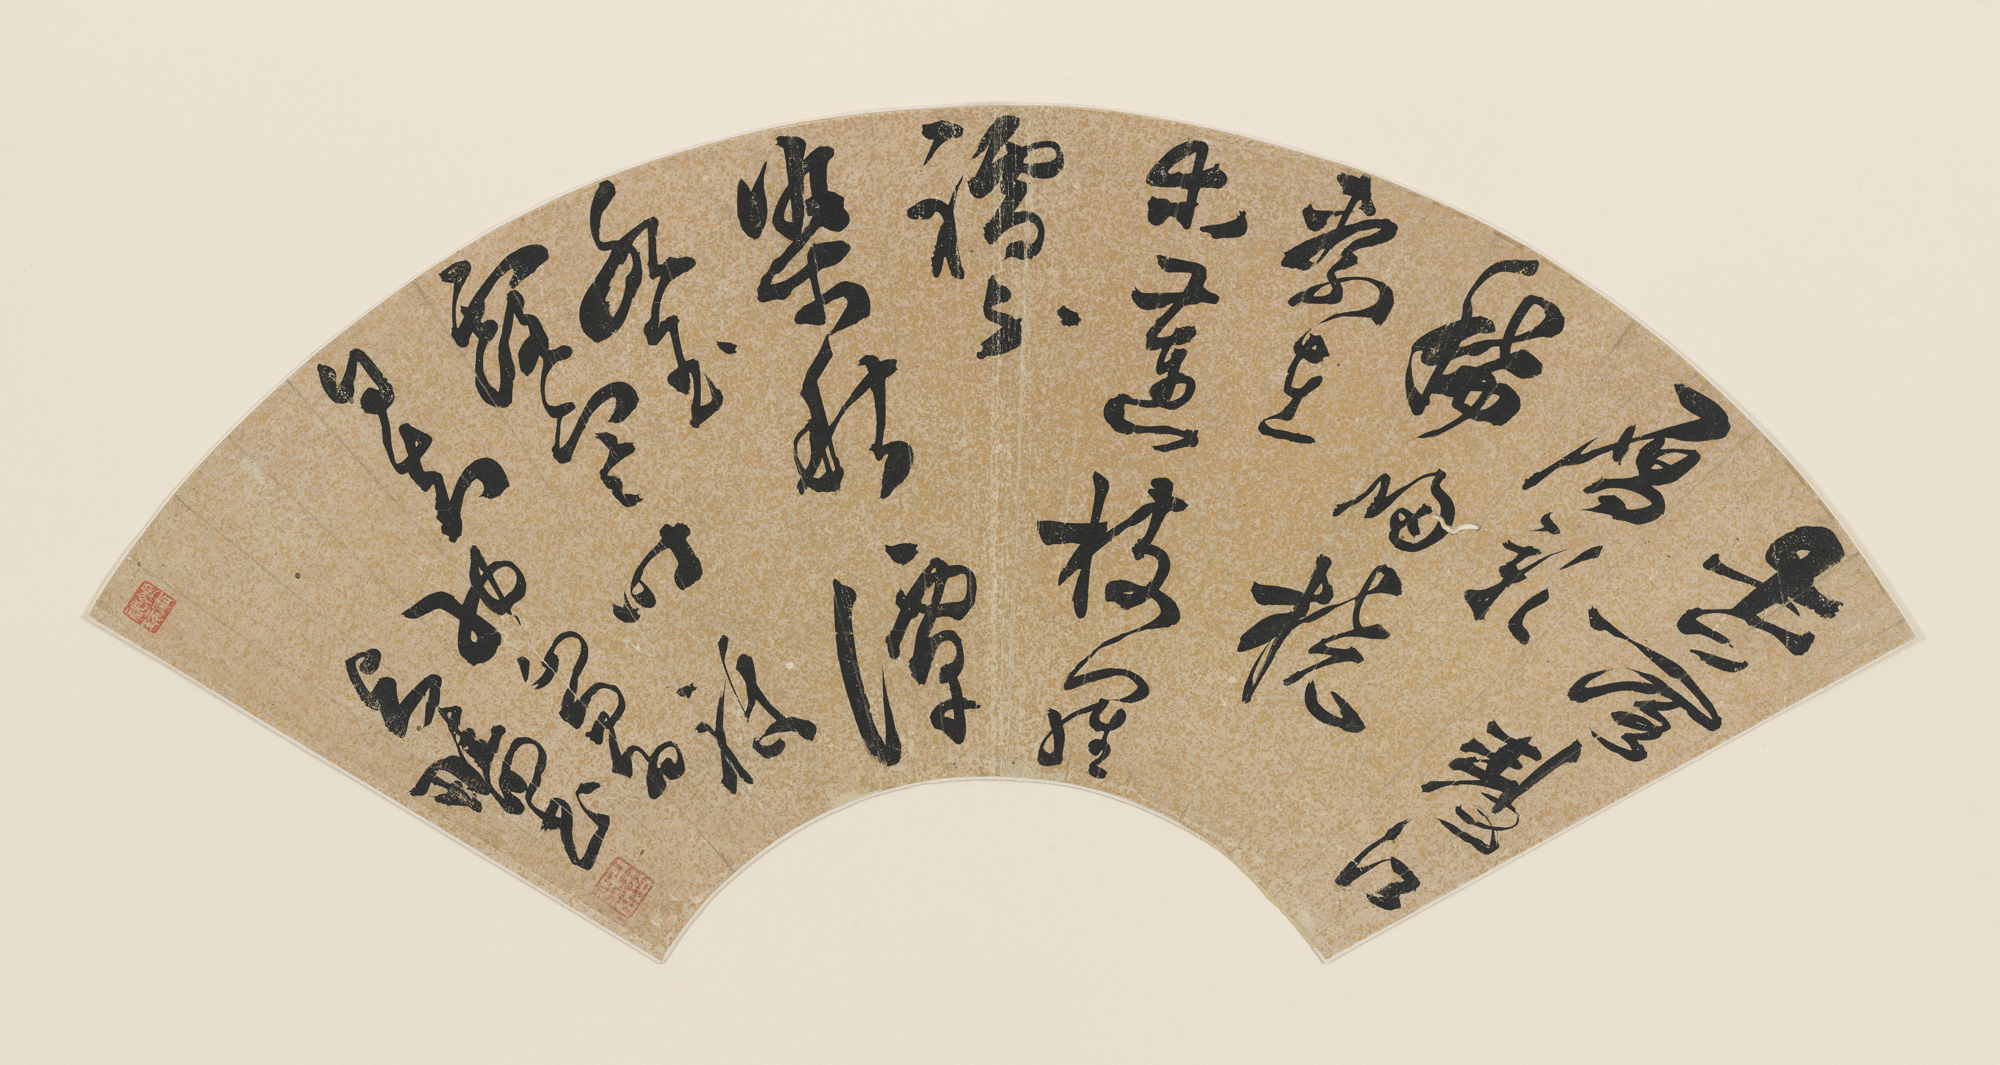 handheld fan with chinese characters in calligraphy